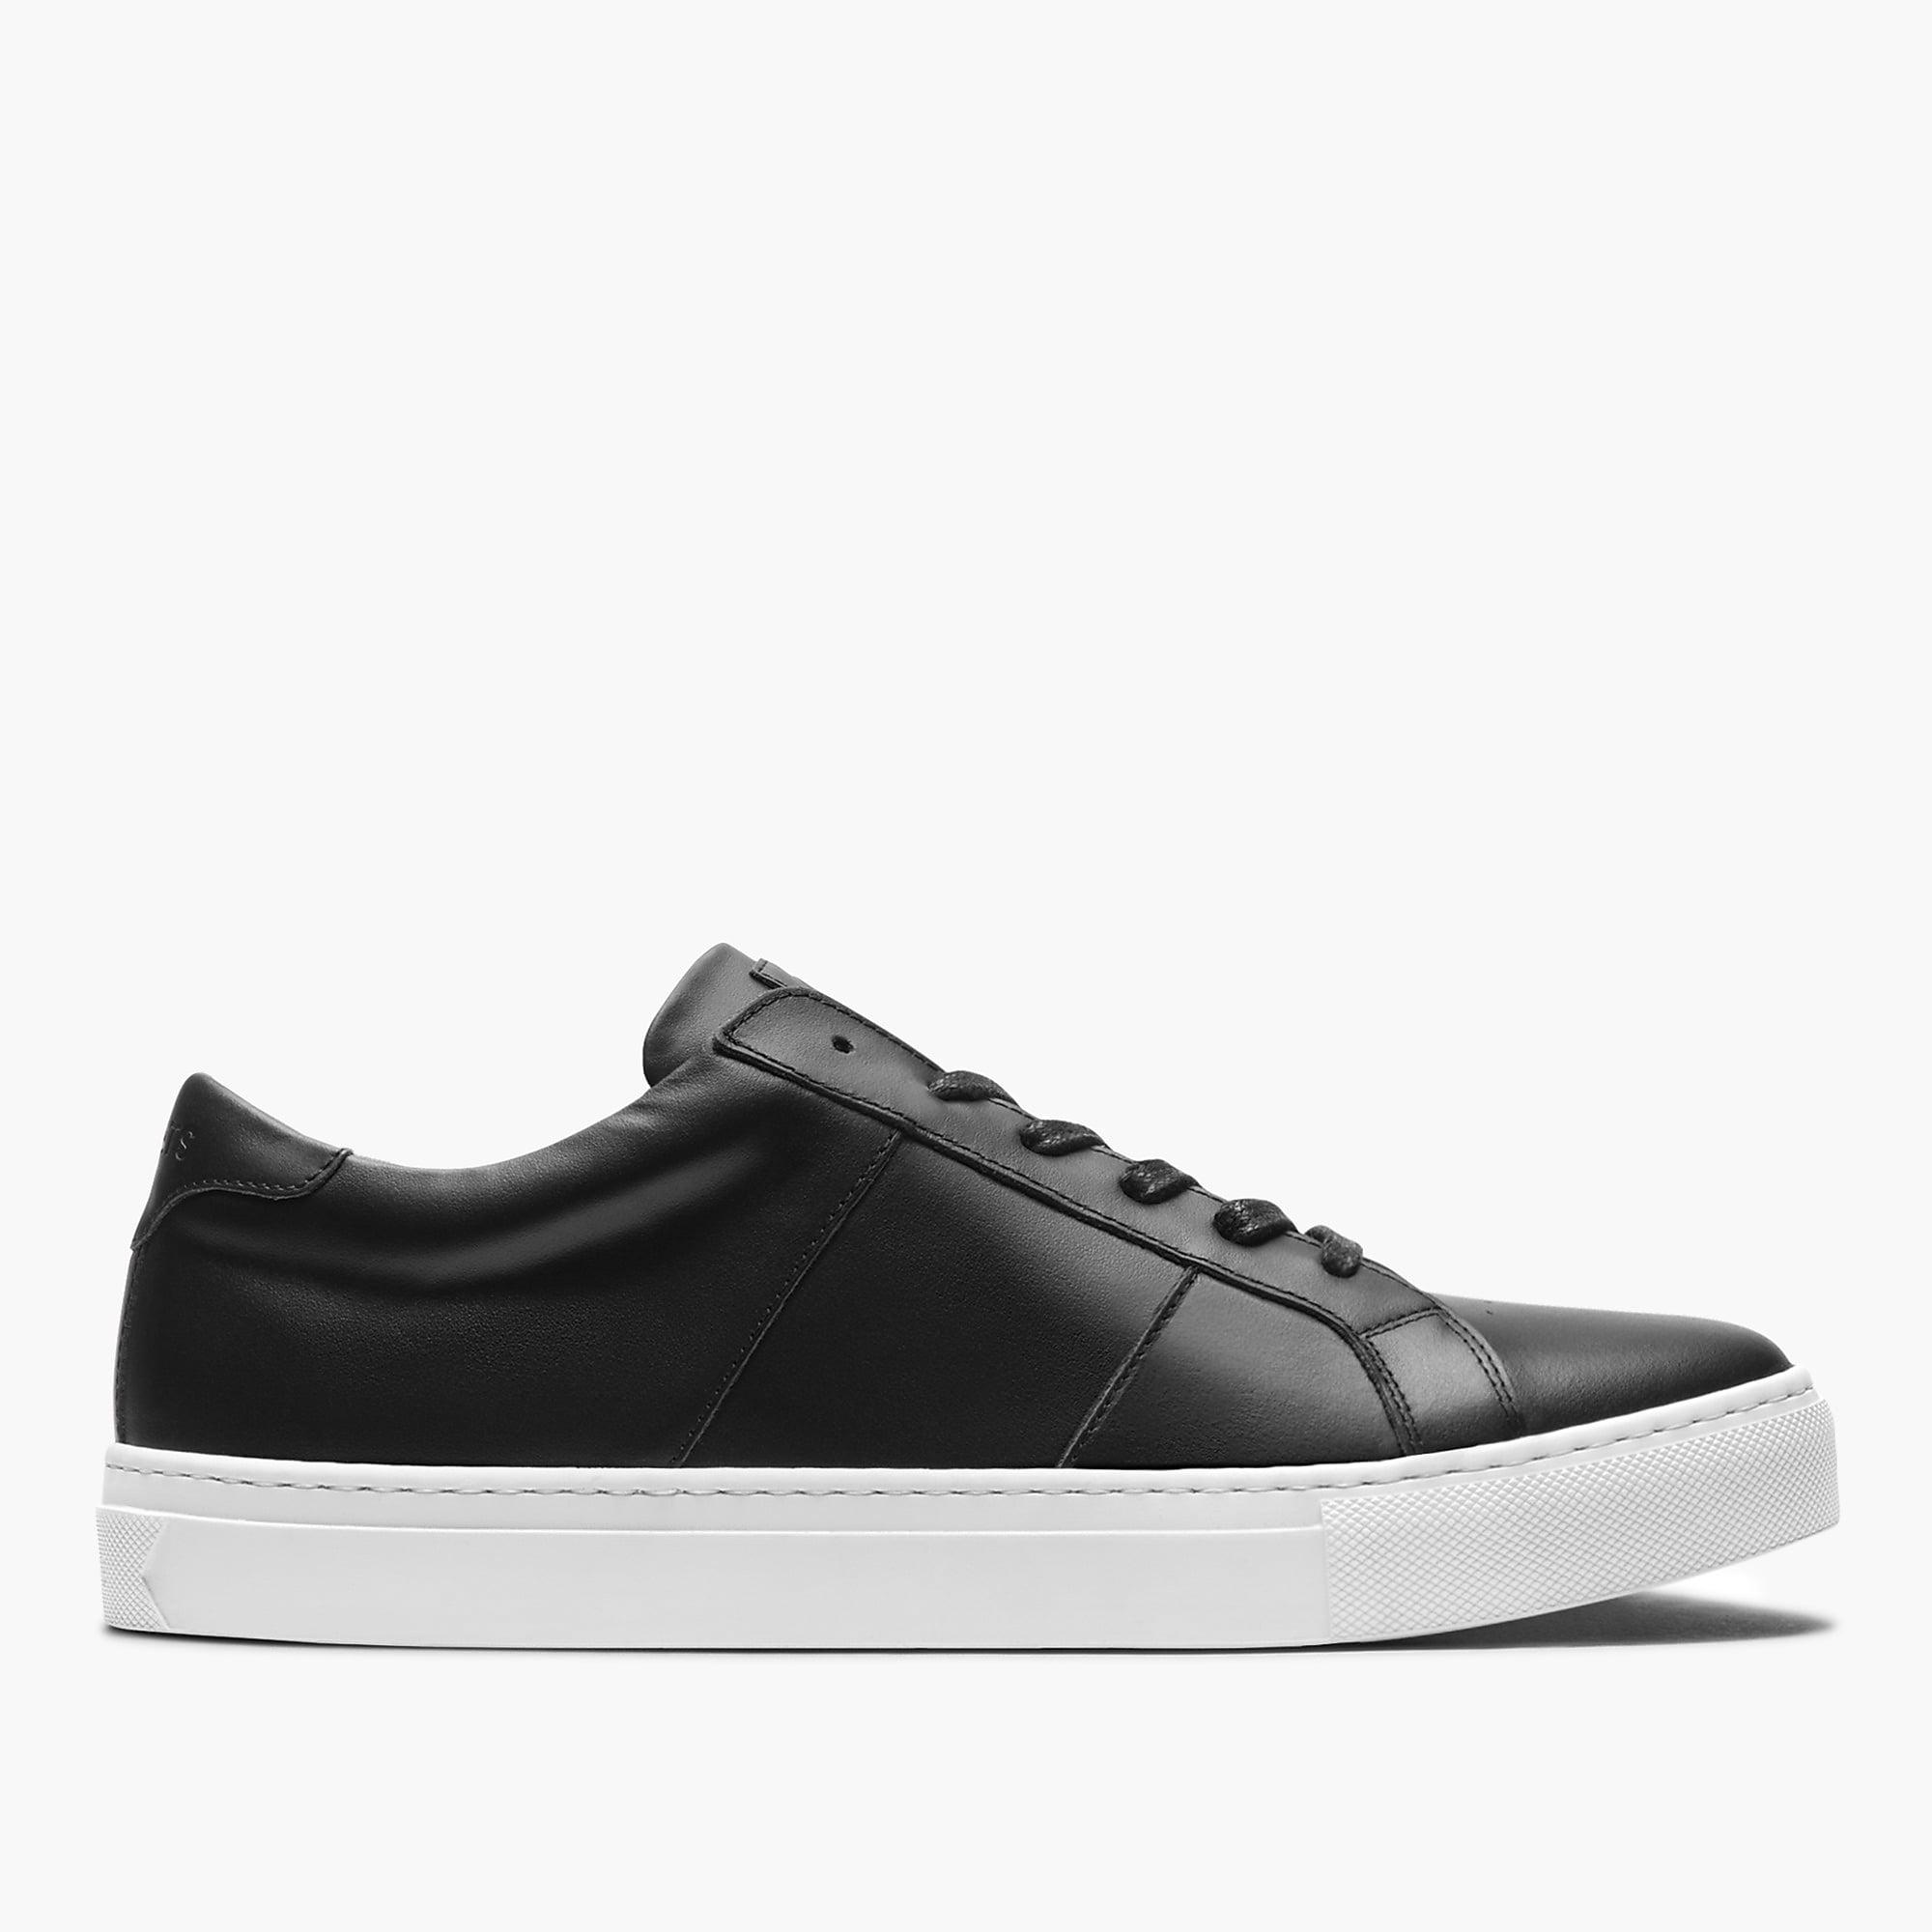 GREATS Leather Royale Sneakers In Black With Contrast Sole for Men - Lyst